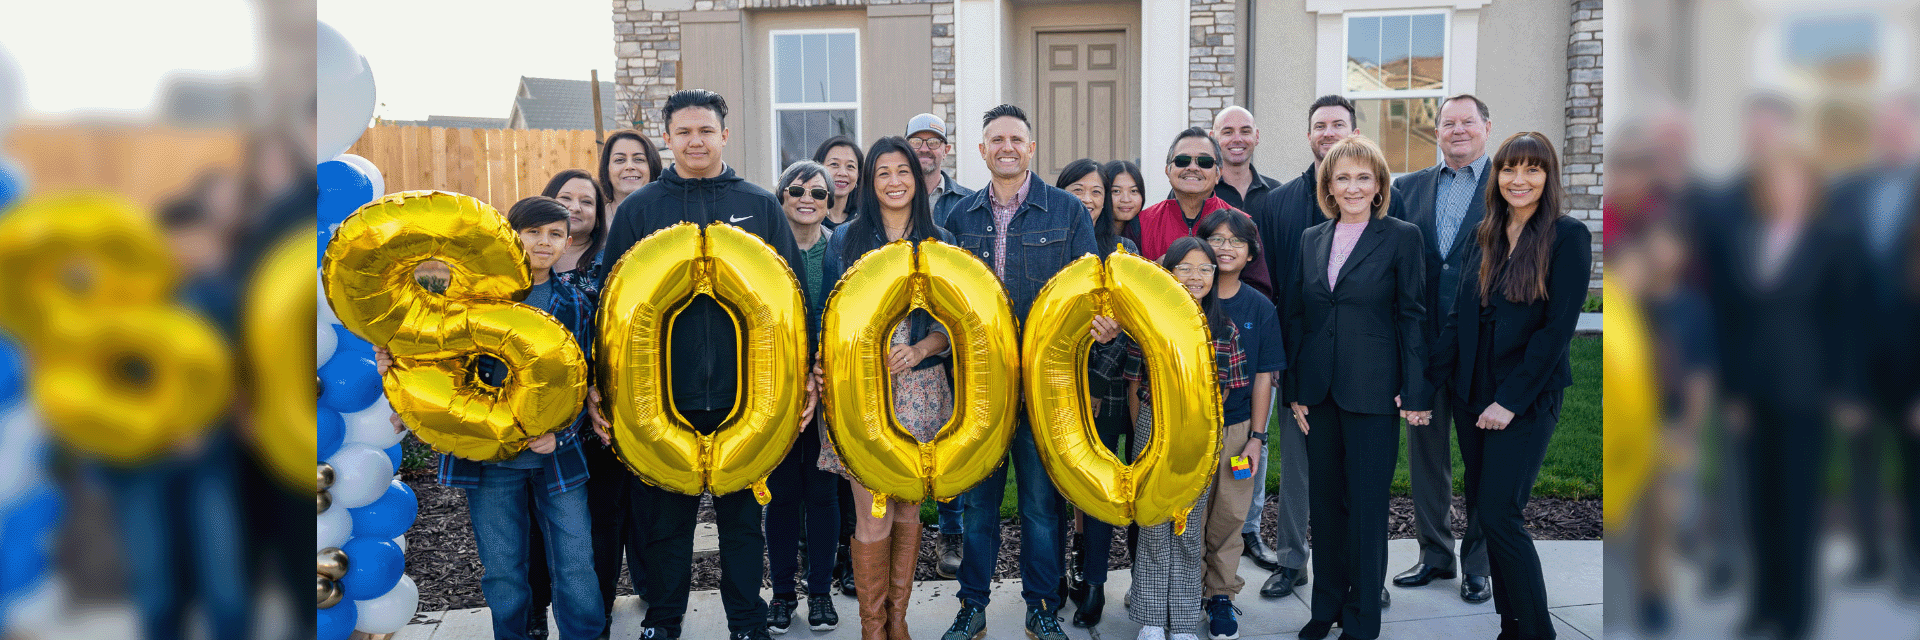 One Company’s Incredible Milestone Met; Another Family’s Dream Fulfilled